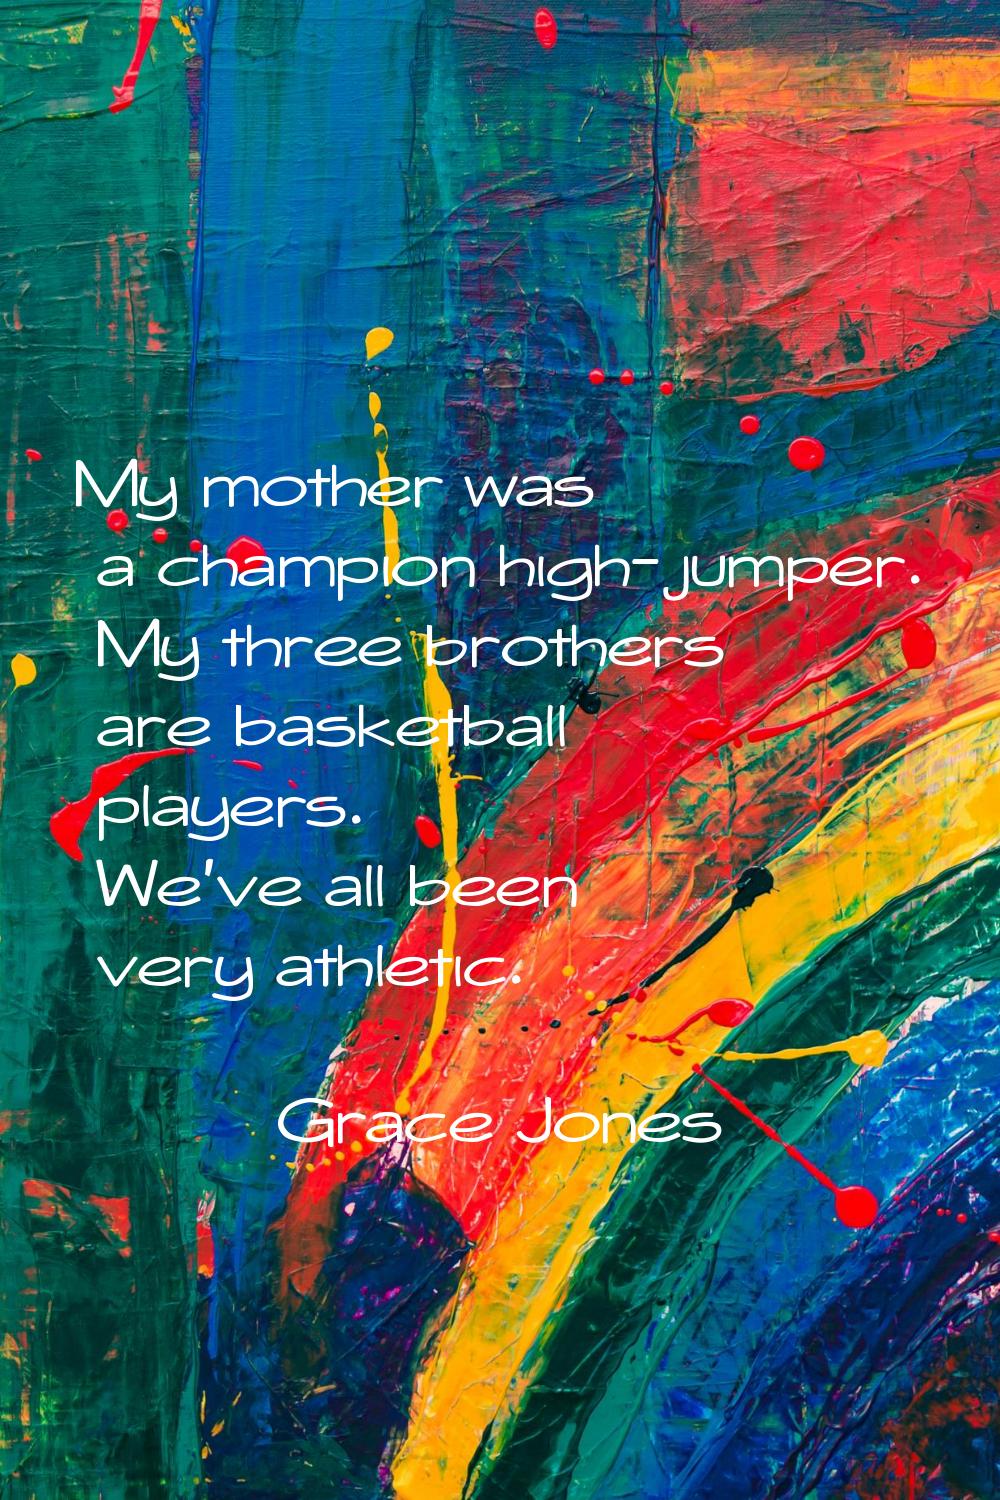 My mother was a champion high-jumper. My three brothers are basketball players. We've all been very